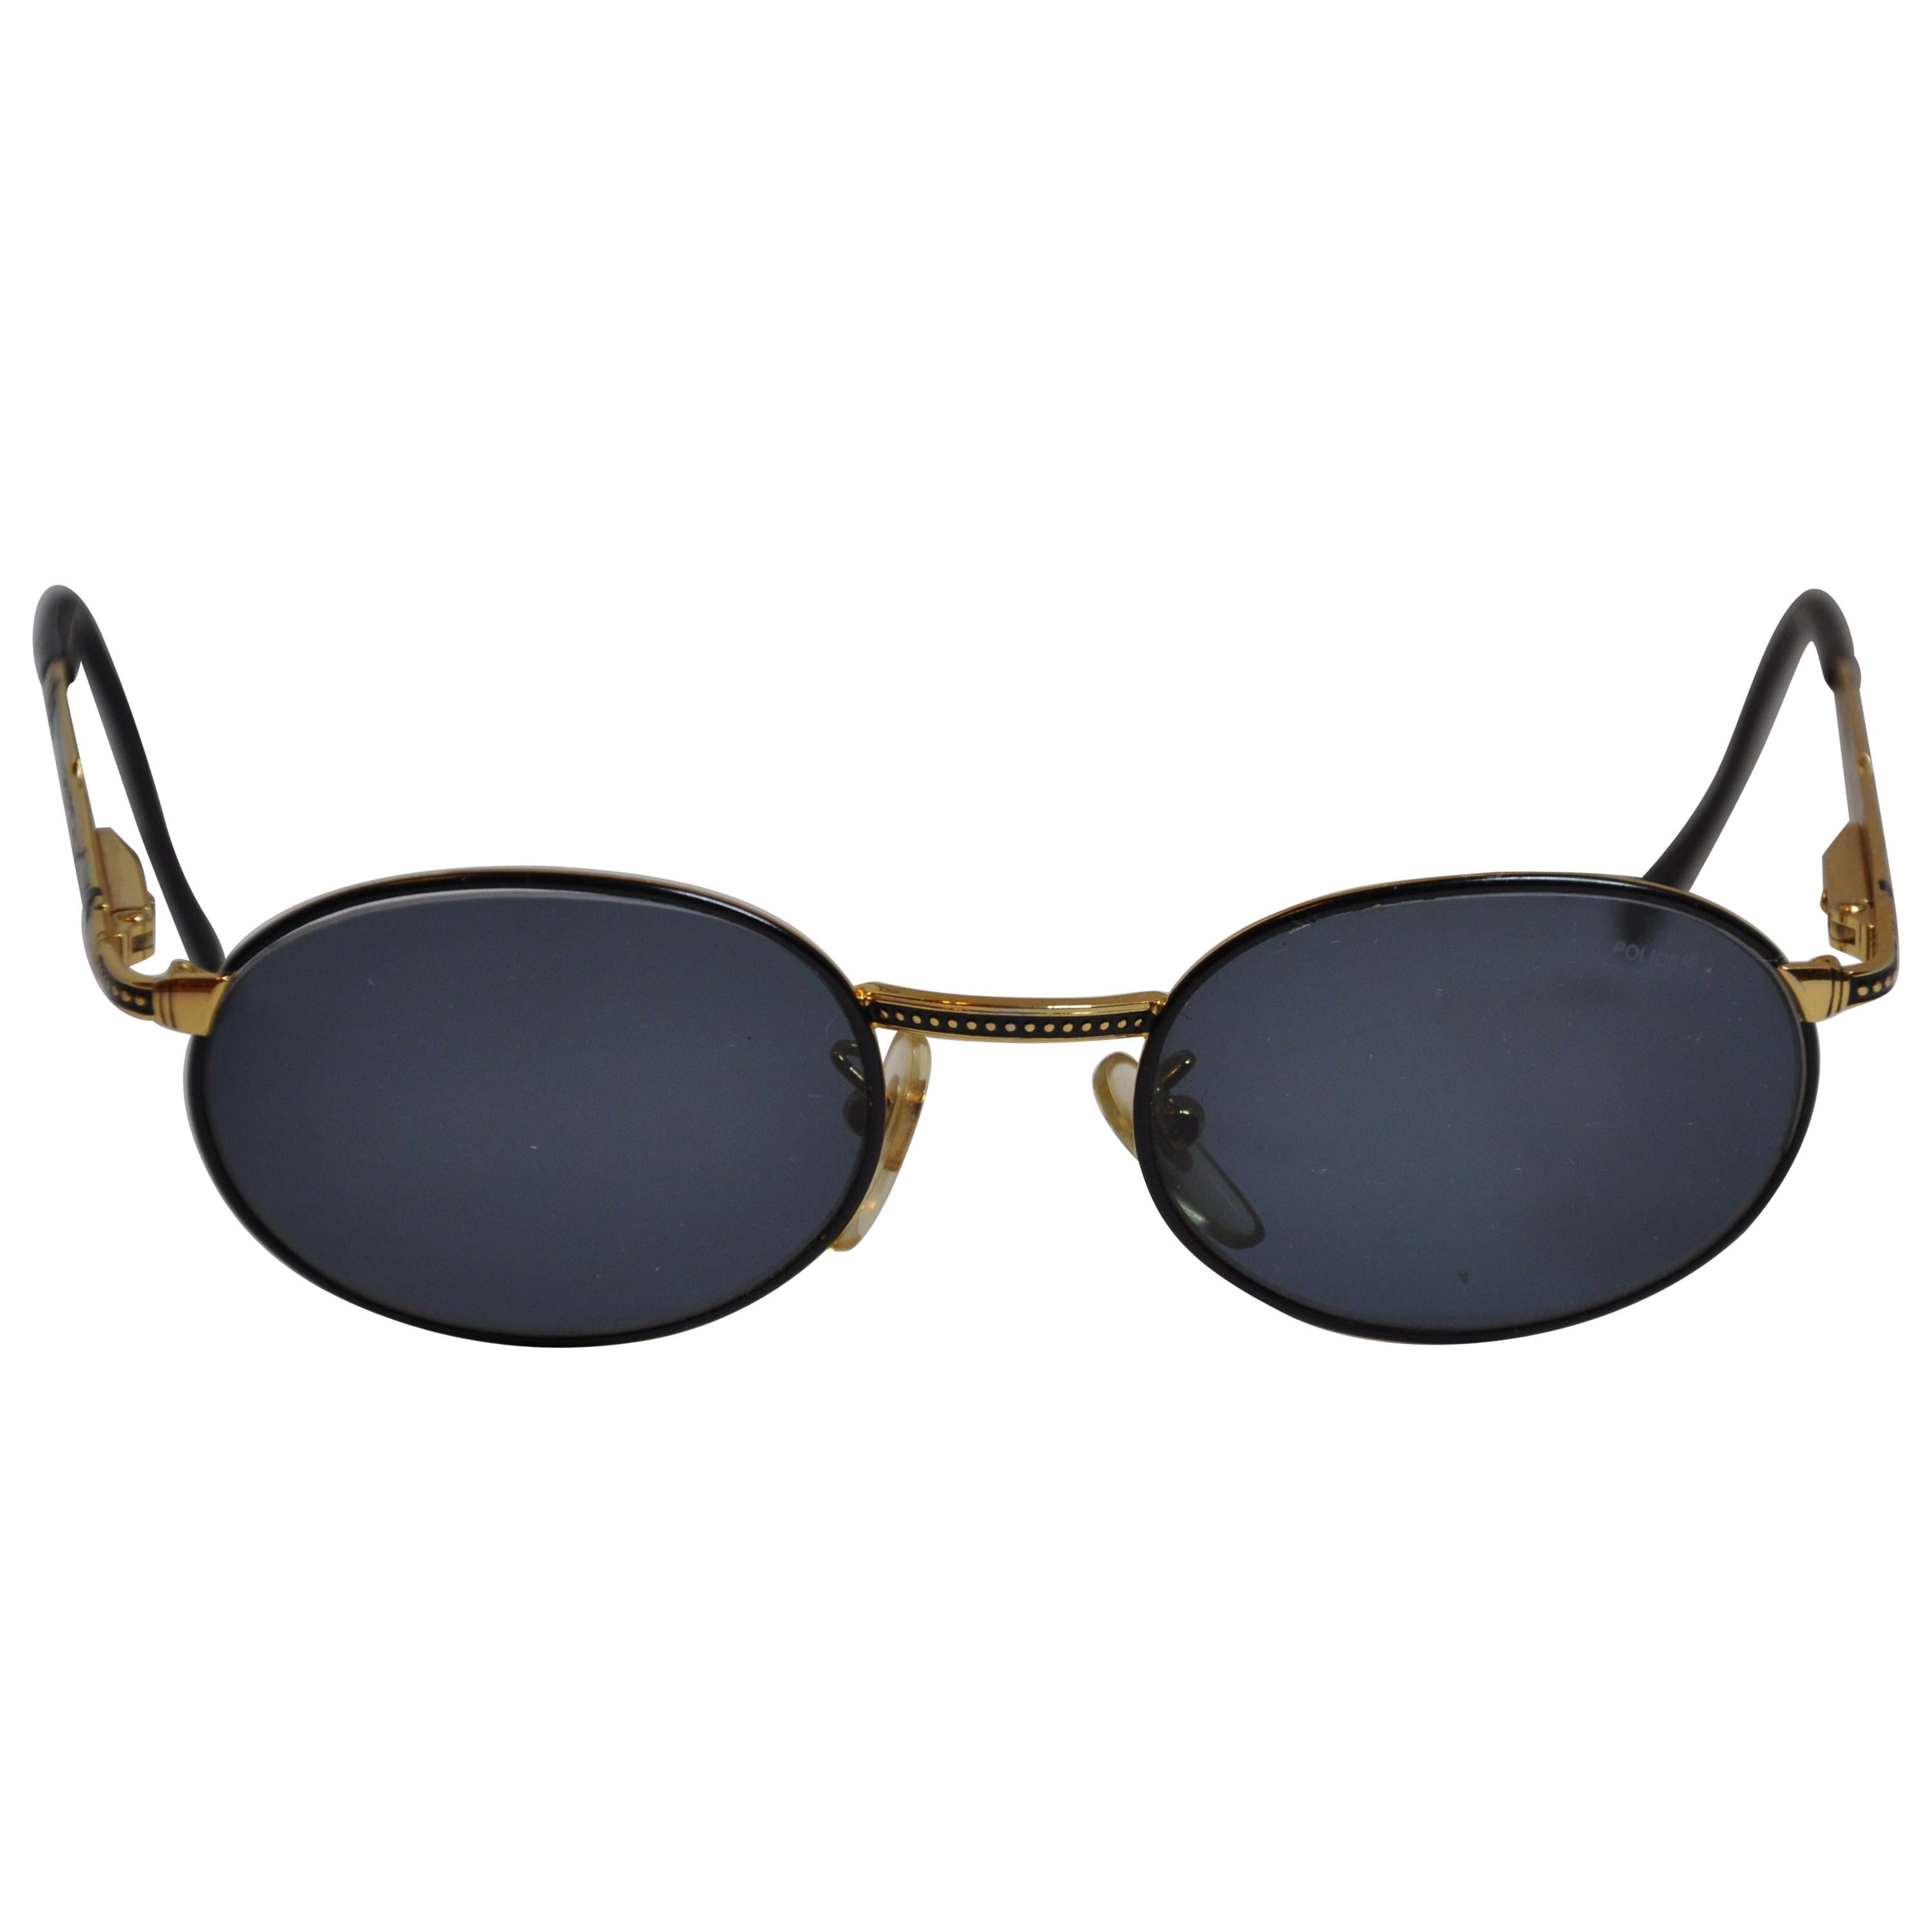 Police Black Lucite with Gilded Gold Hardware & Detailed Etching Sunglasses